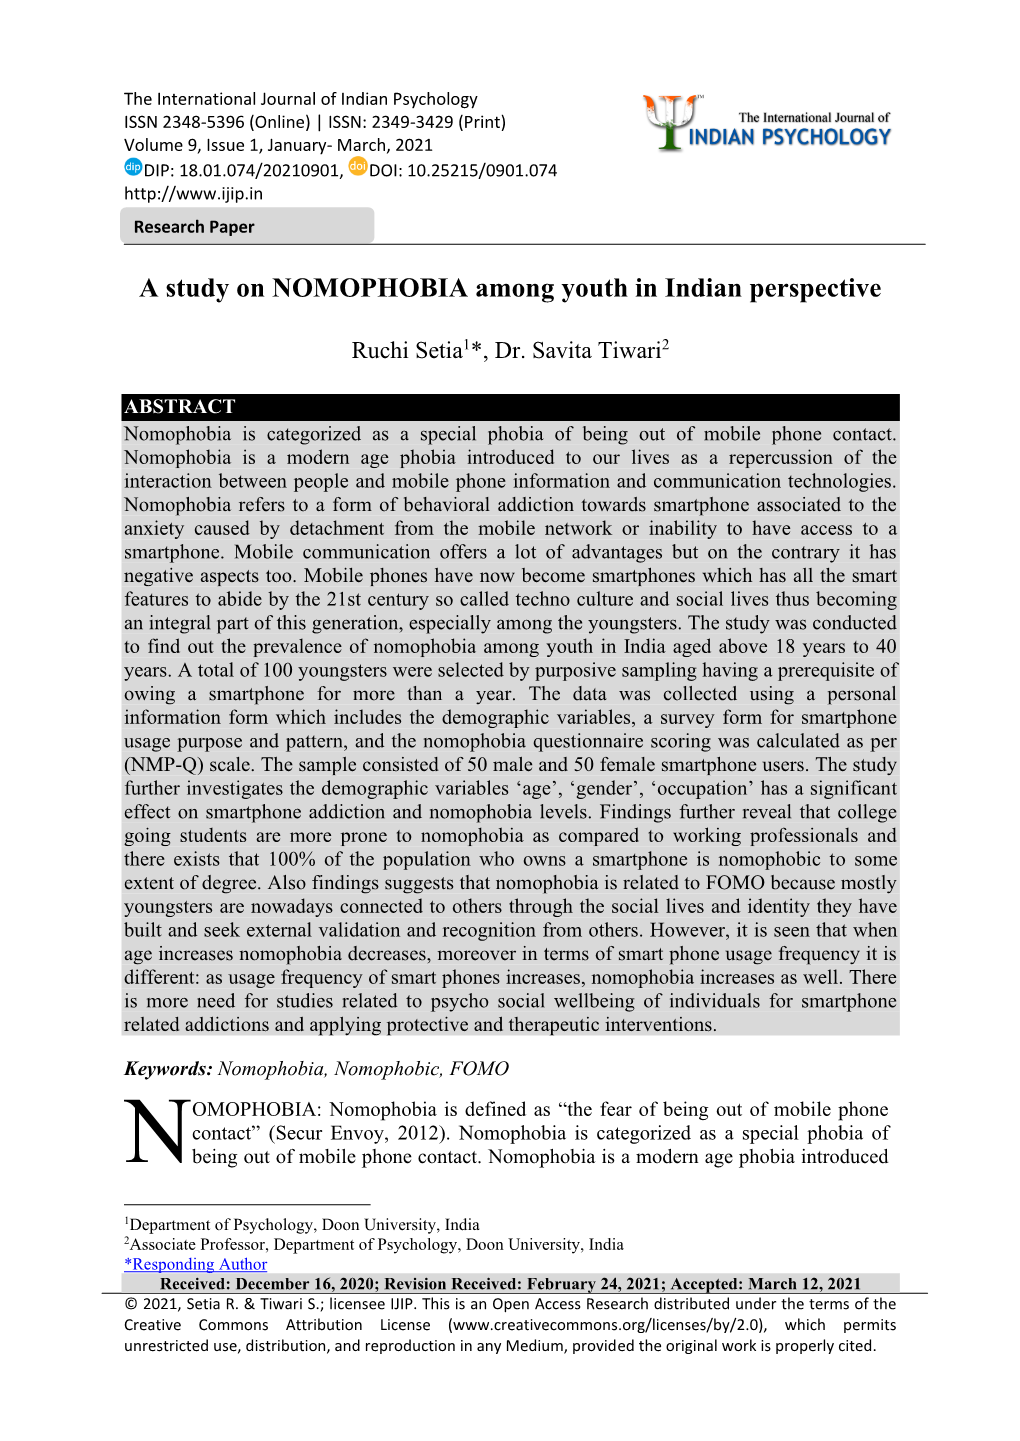 A Study on NOMOPHOBIA Among Youth in Indian Perspective